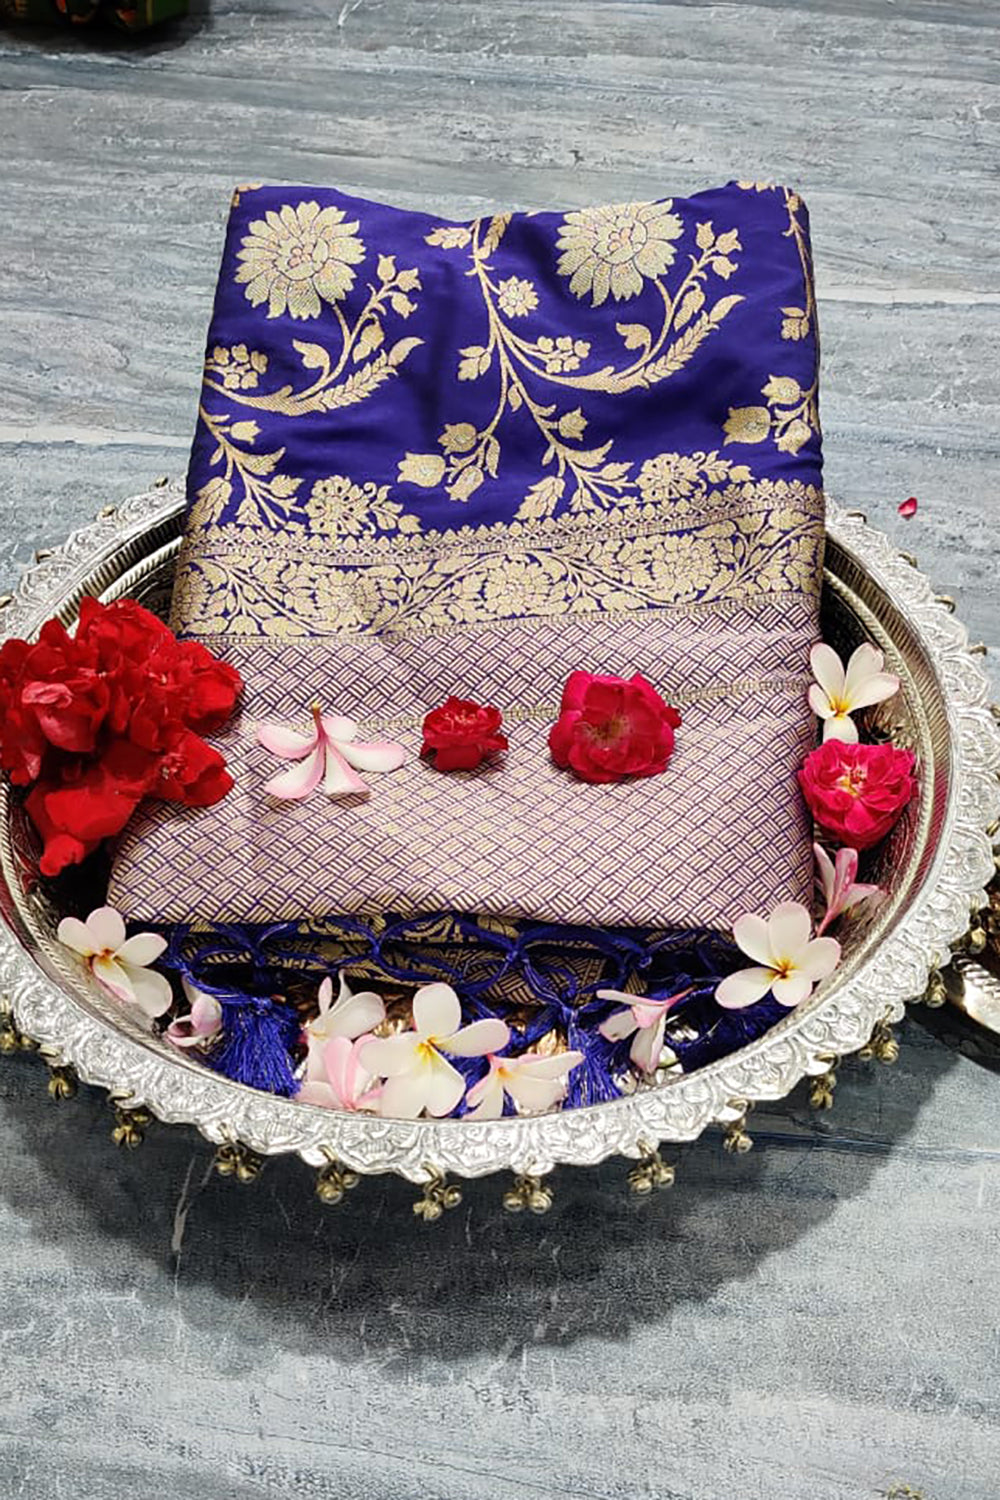 Saree Packing Tray - Sari Packing Tray Price Starting From Rs 2/Pc. Find  Verified Sellers in Chennai - JdMart